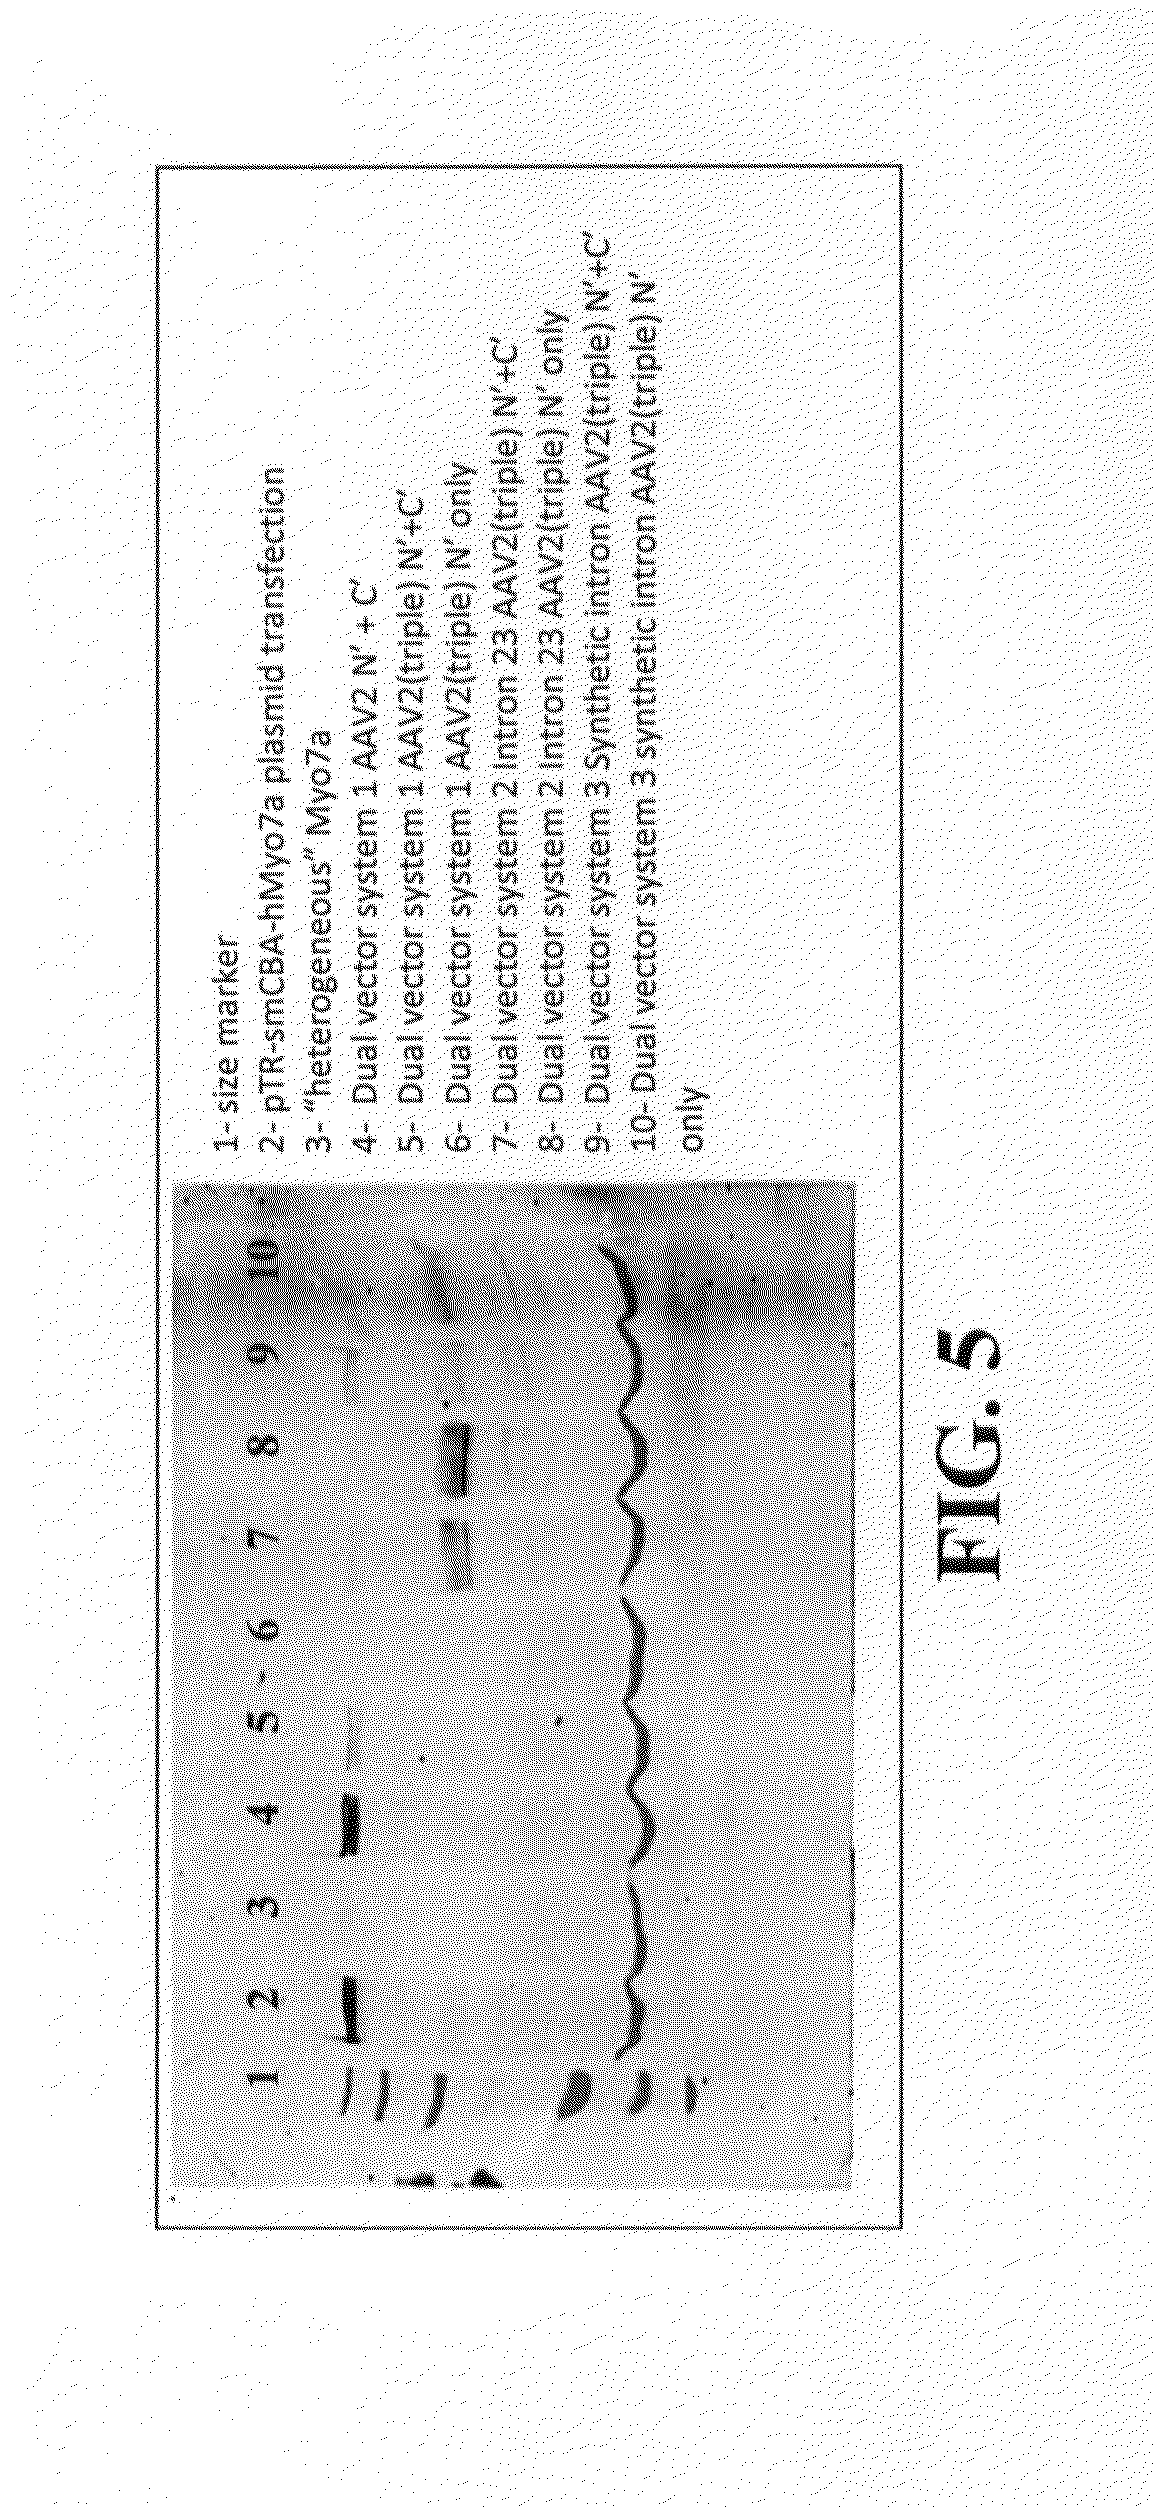 Dual-AAV Vector-Based Systems and Methods for Delivering Oversized Genes to Mammalian Cells